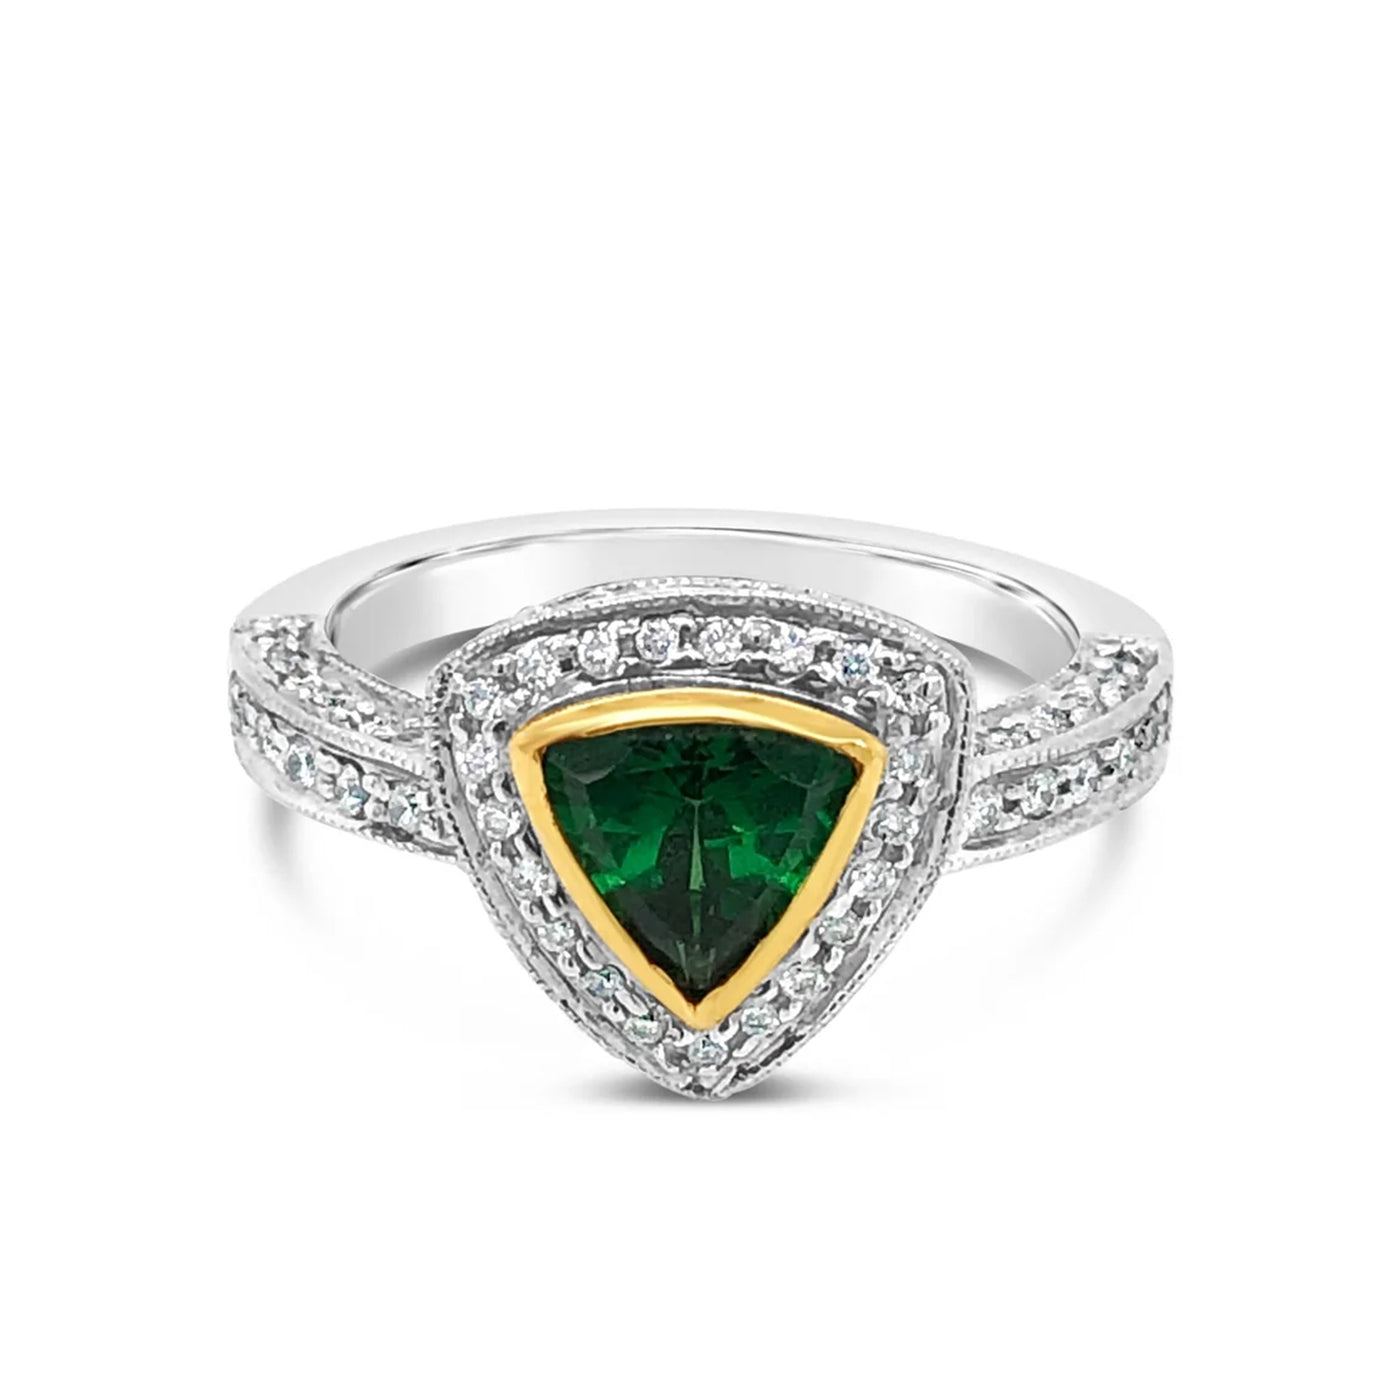 Tsavorite Trilliant with Yellow Gold Bezel and Diamond Accents Ring